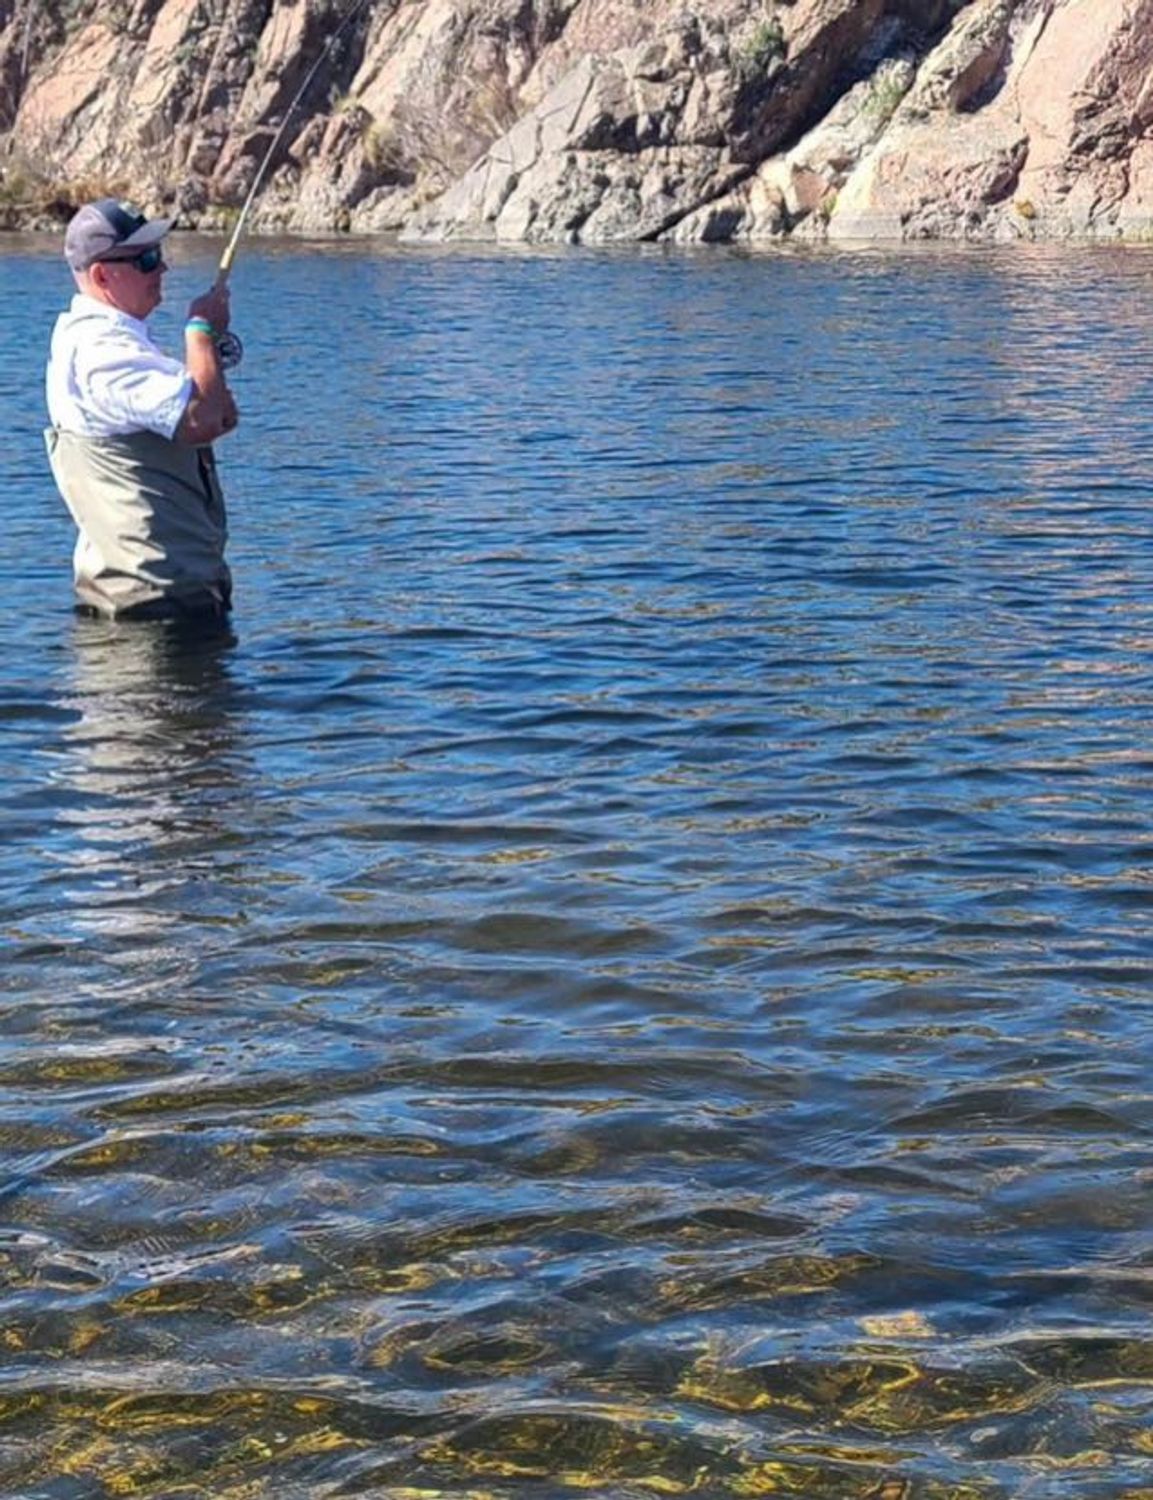 Why should people book a fly fishing trip with lo water guide service when visiting spring training in Arizona?